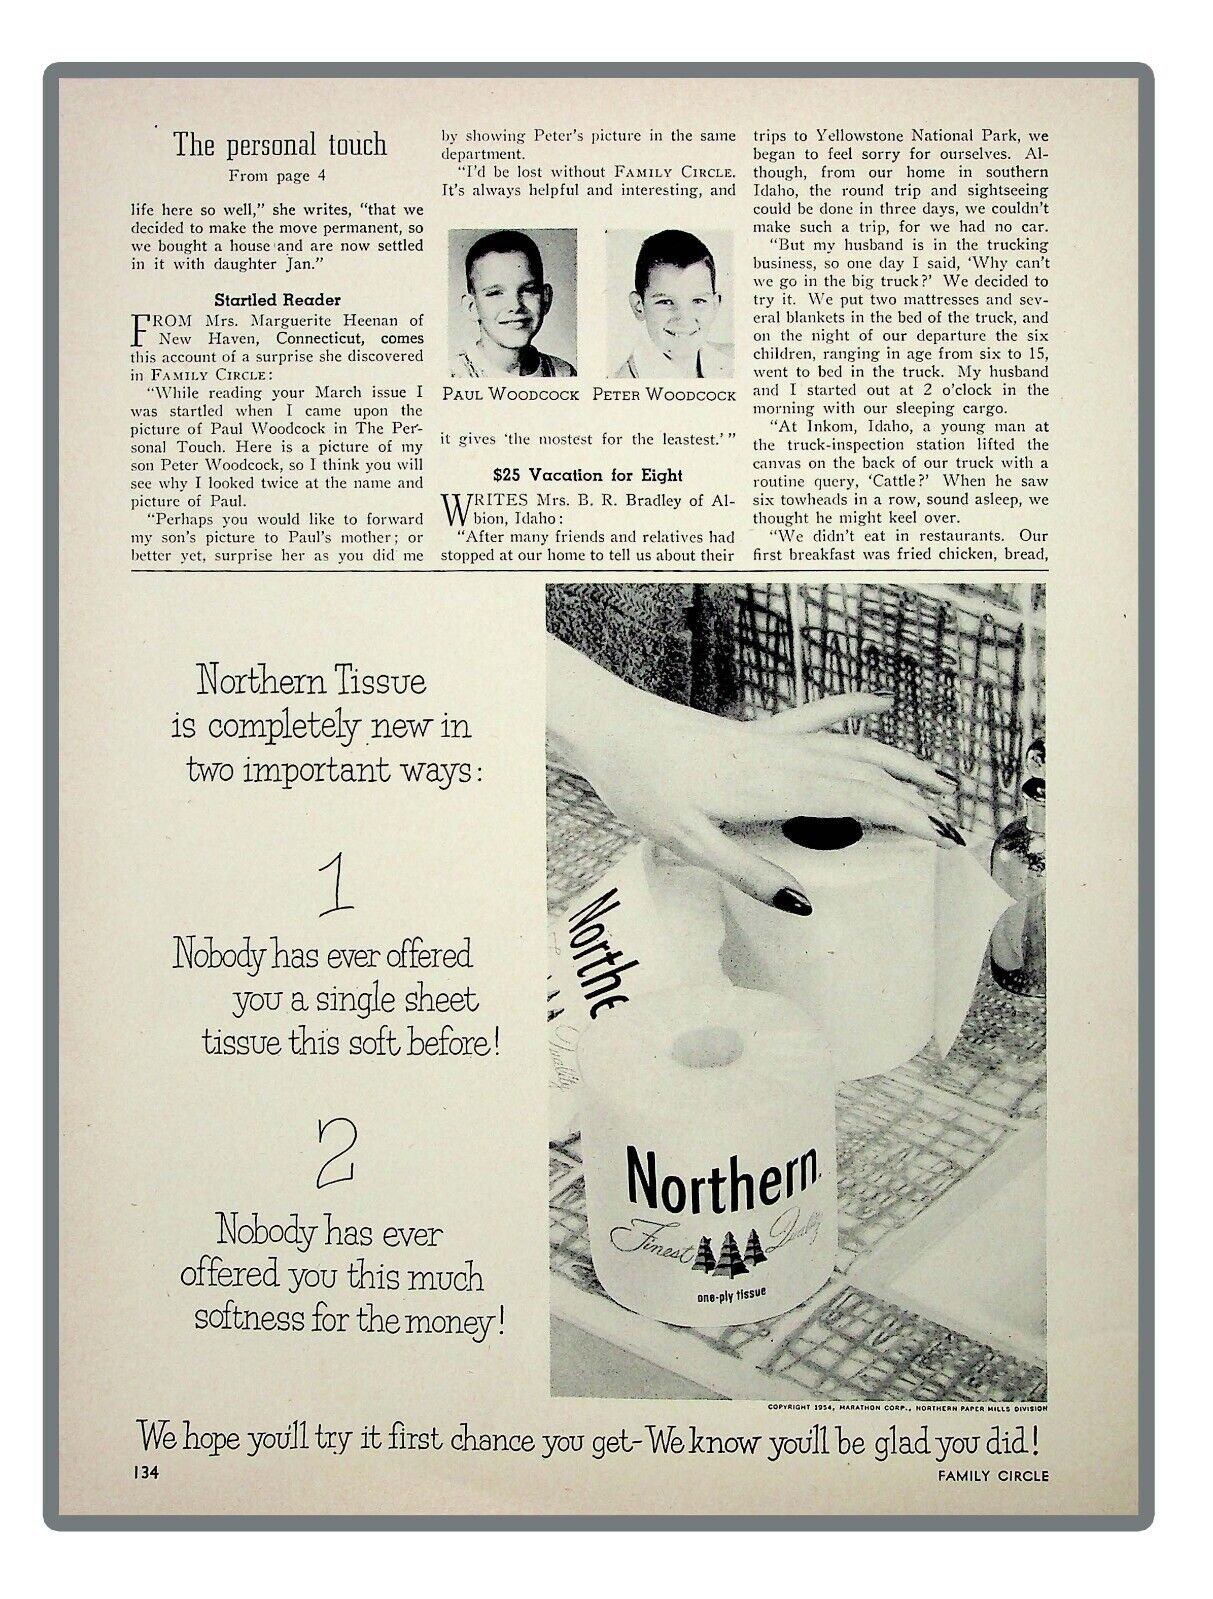 Northern Tissue 1954 Vintage print ad 1950s art retro home products